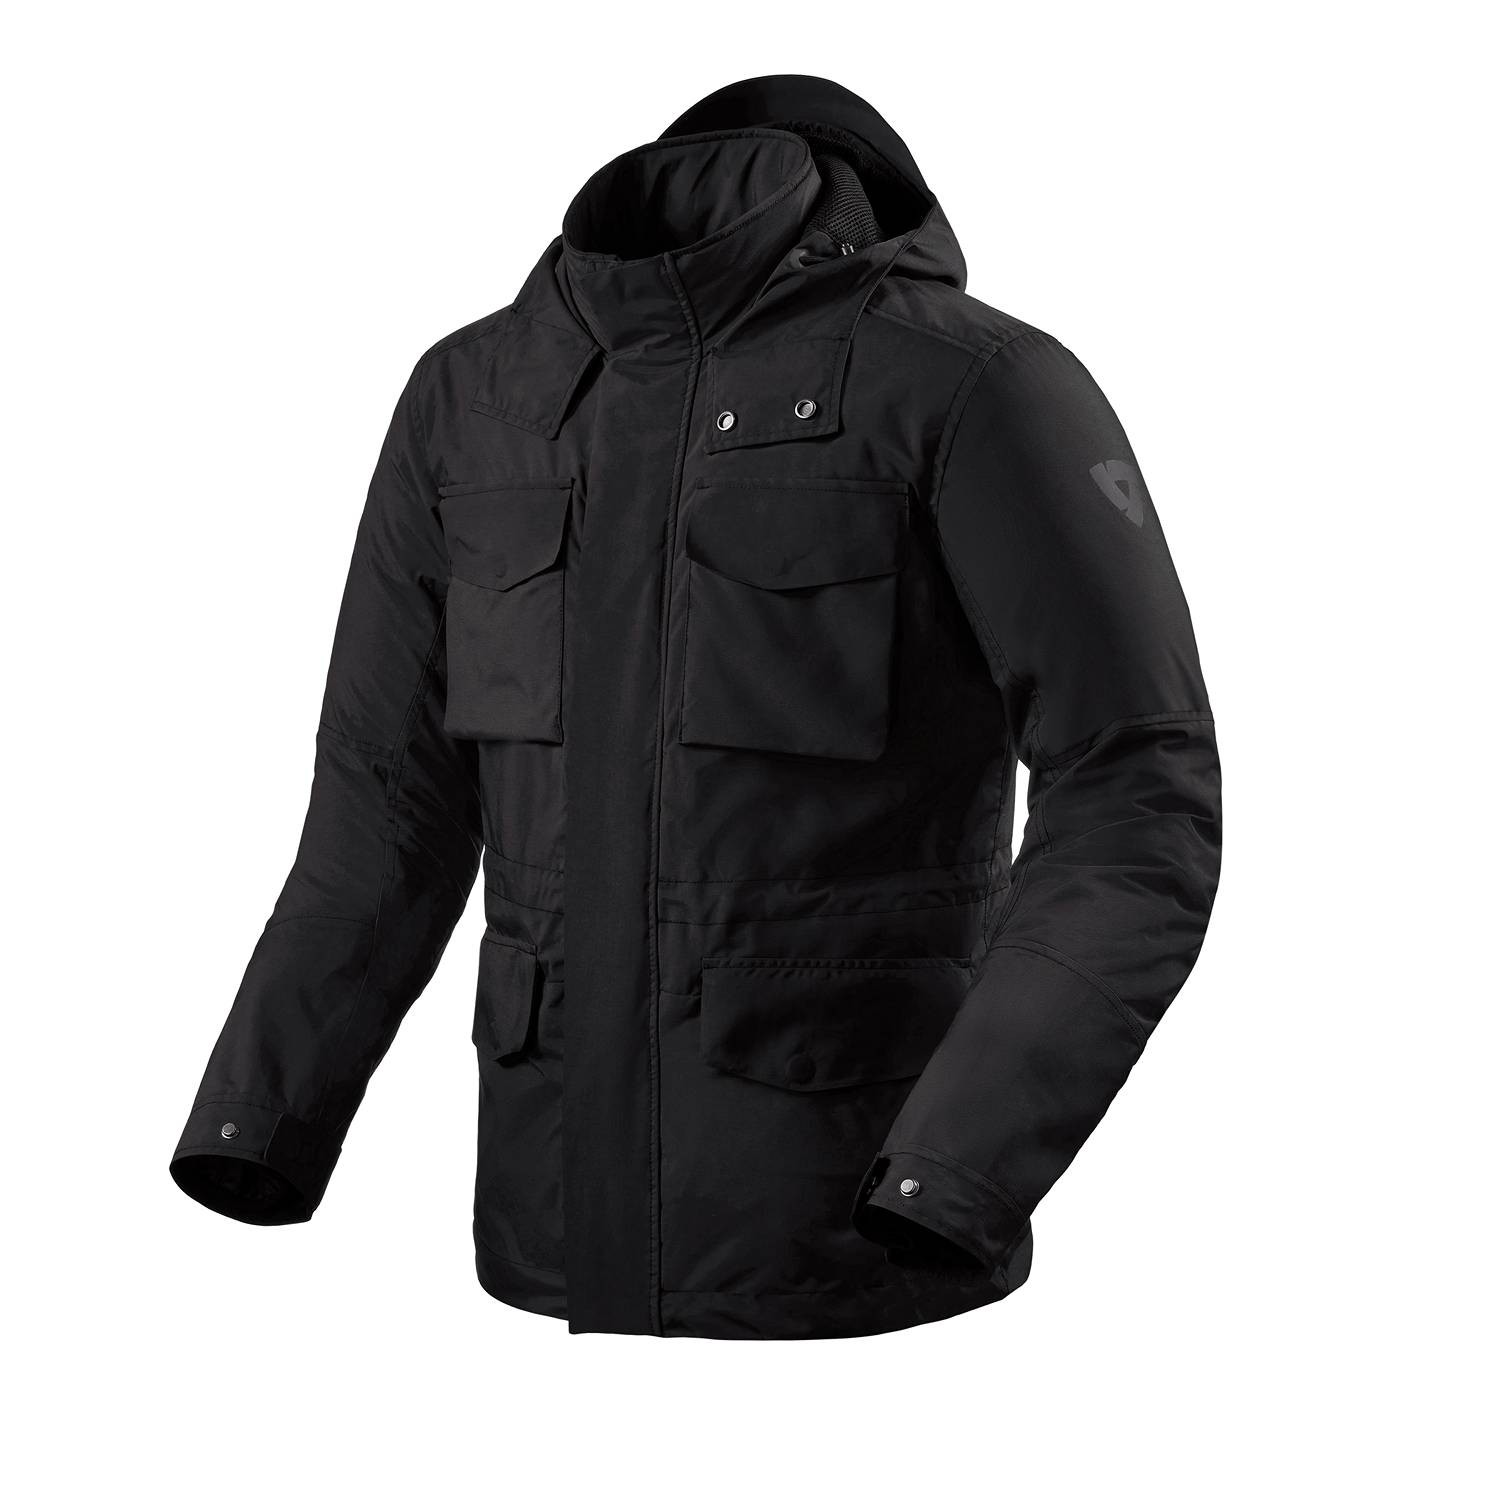 Image of REV'IT! Triomphe 2 H2O Jacket Black Size S ID 8700001349307